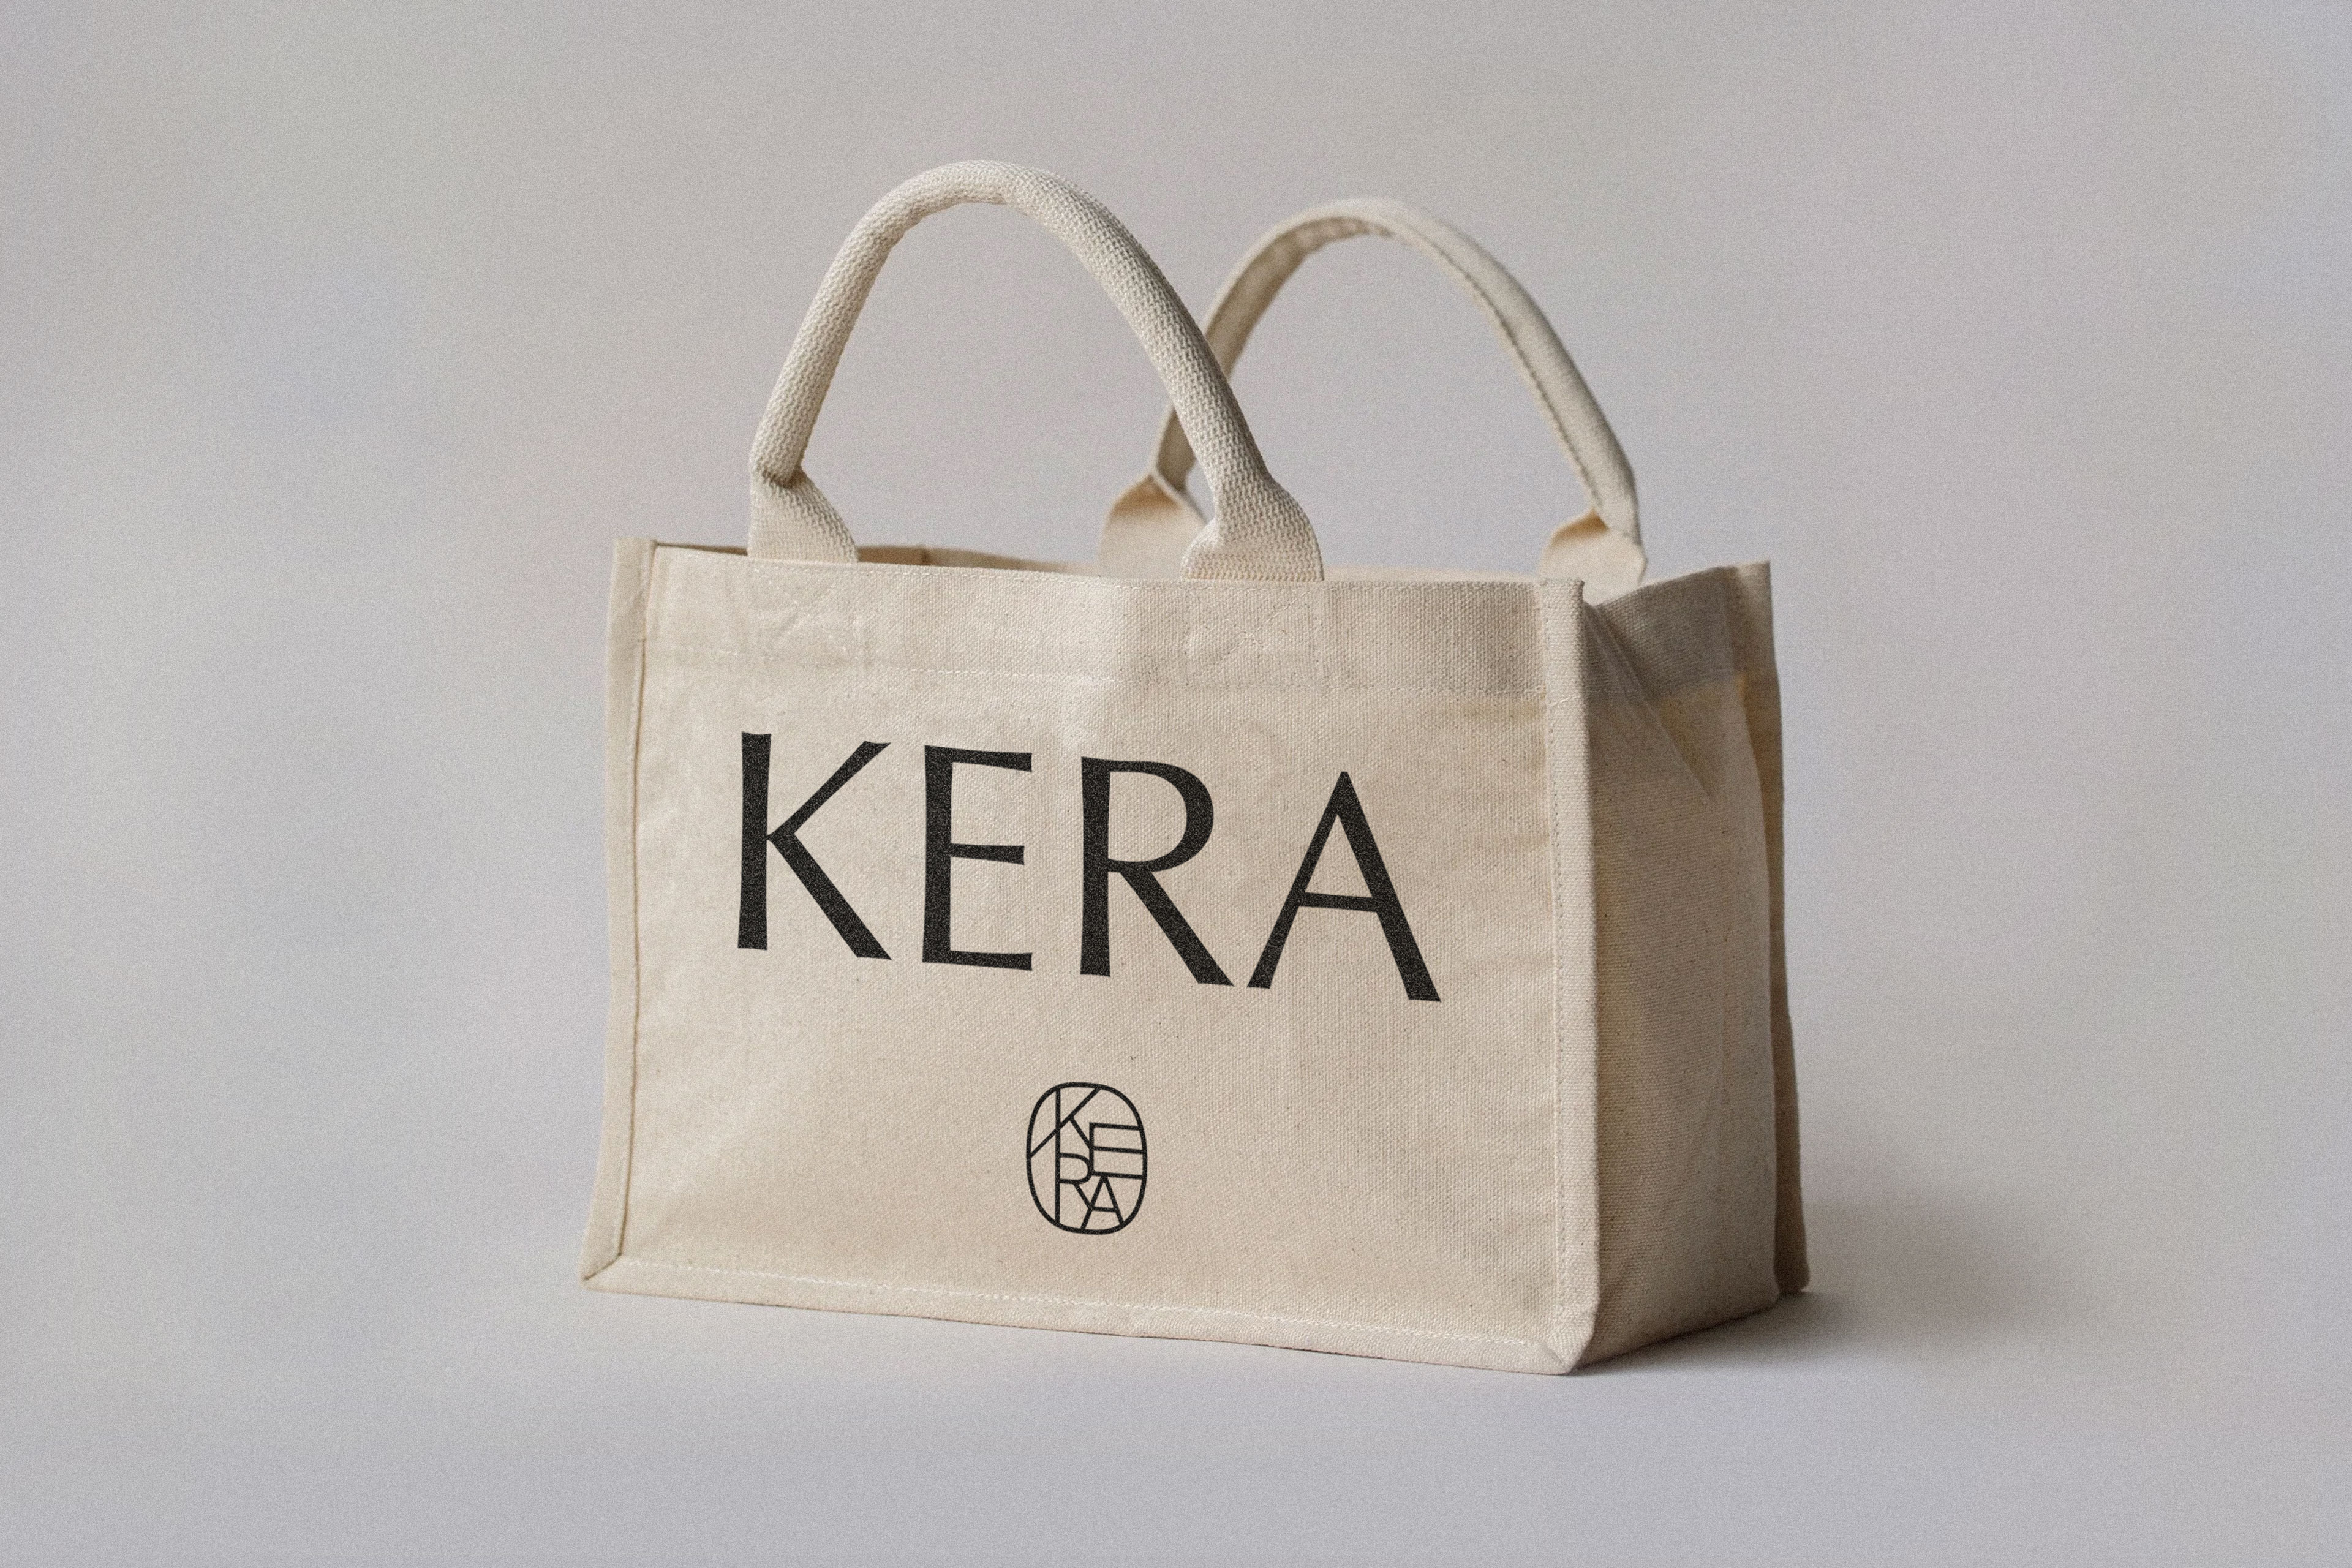 A canvas bag with the word kera printed on it.